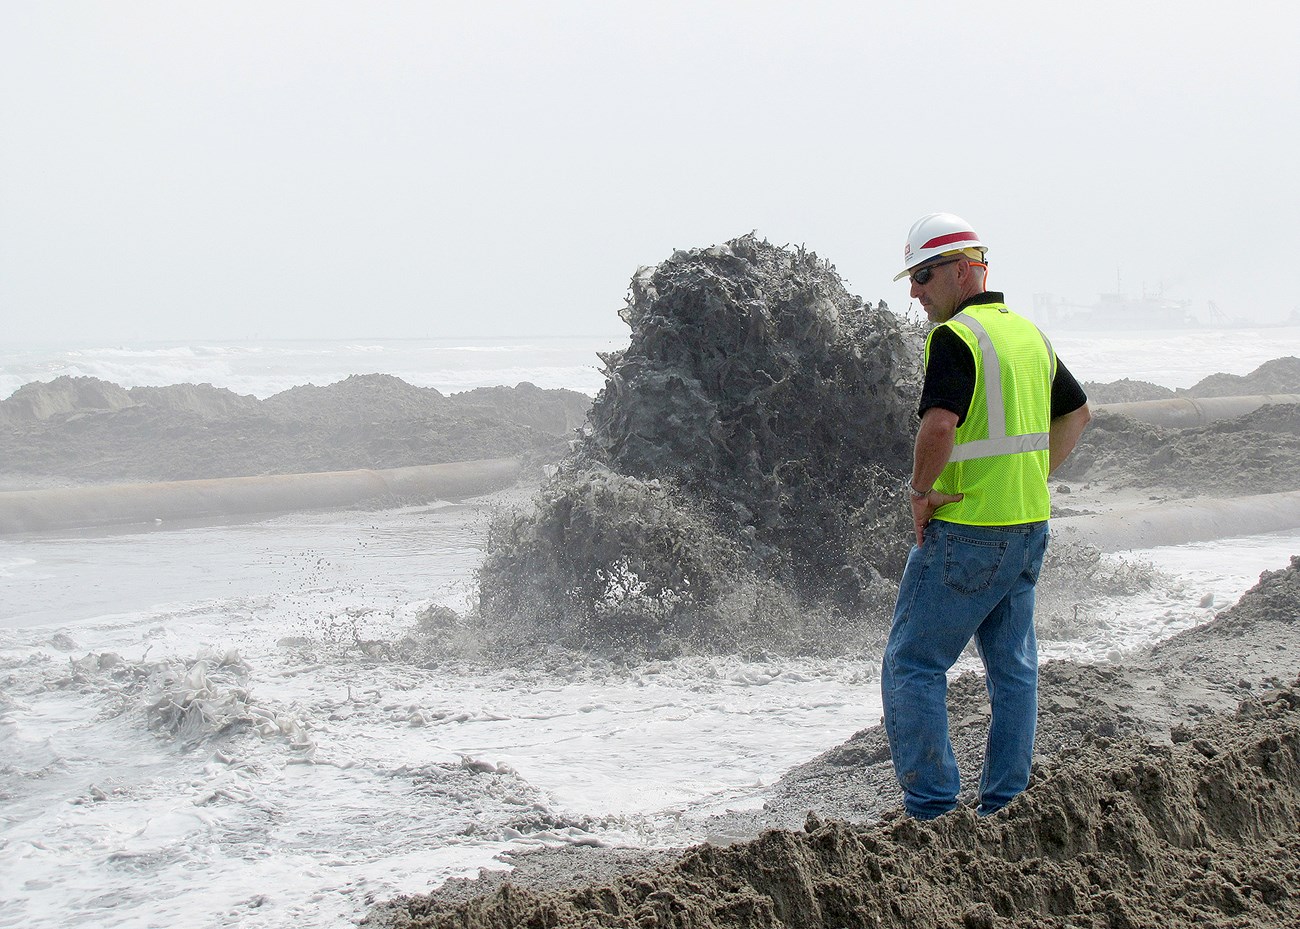 Army Corps of Engineers employee with safety vest and hard hat monitors placement of dredged material on South Padre Island